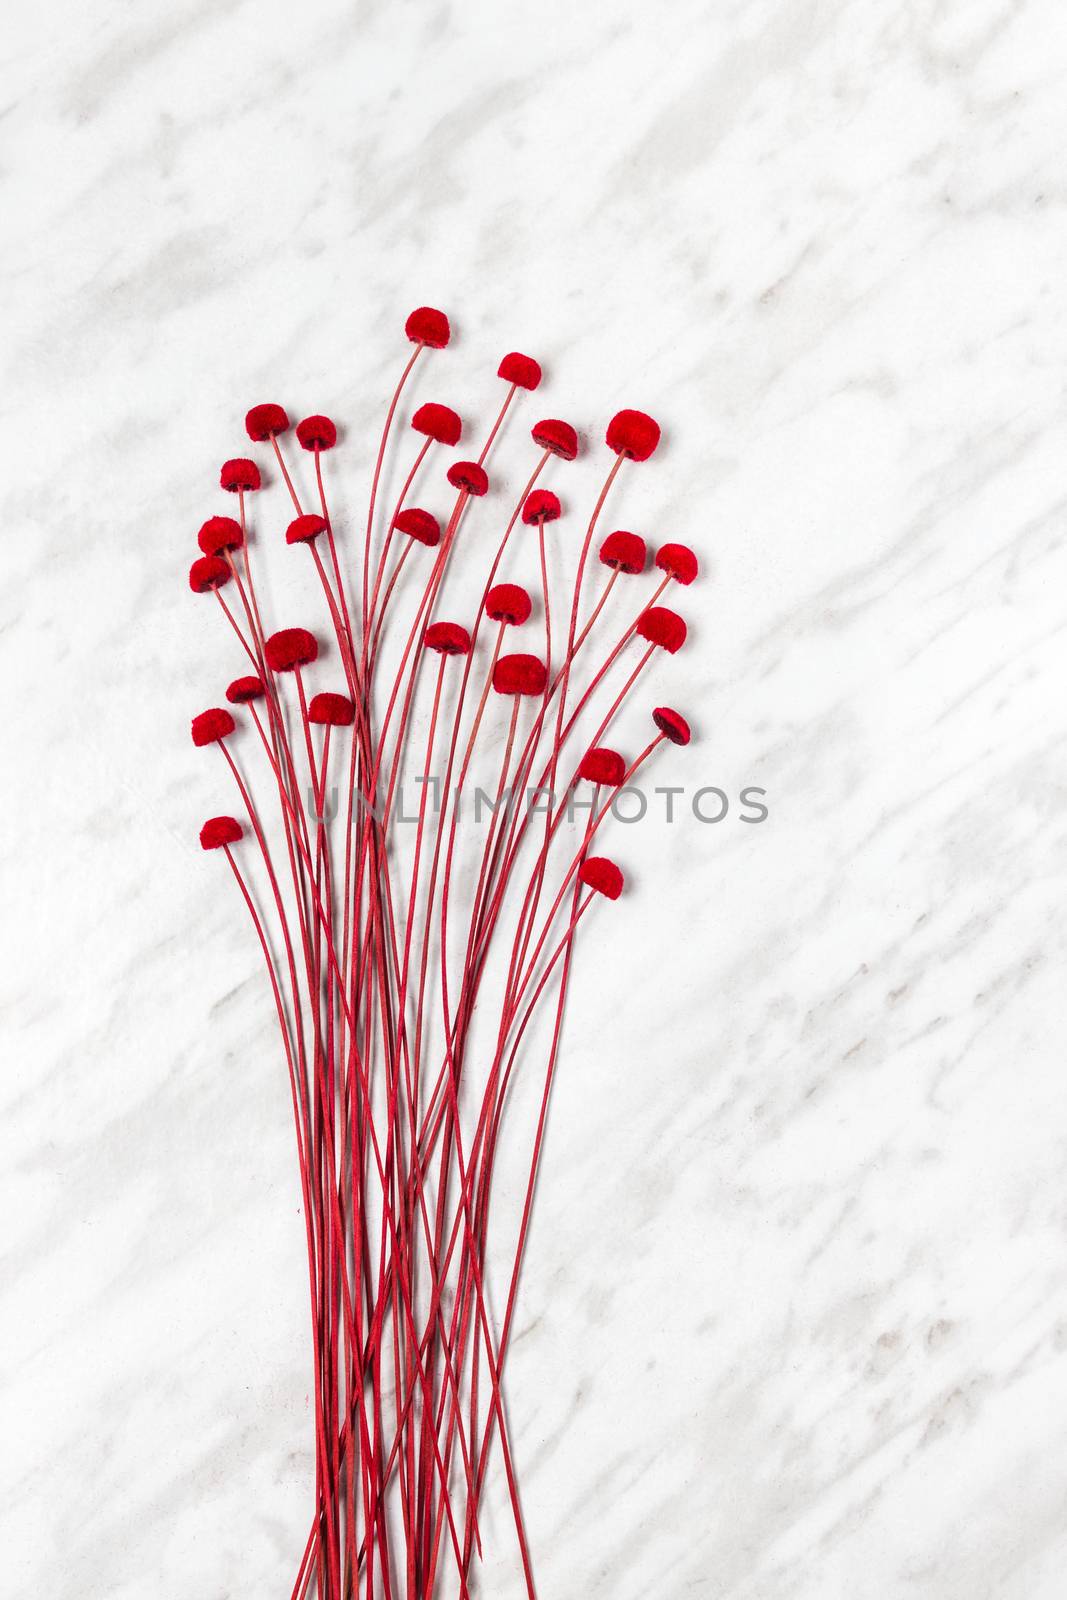 Decorative red flowers on marble background by anikasalsera